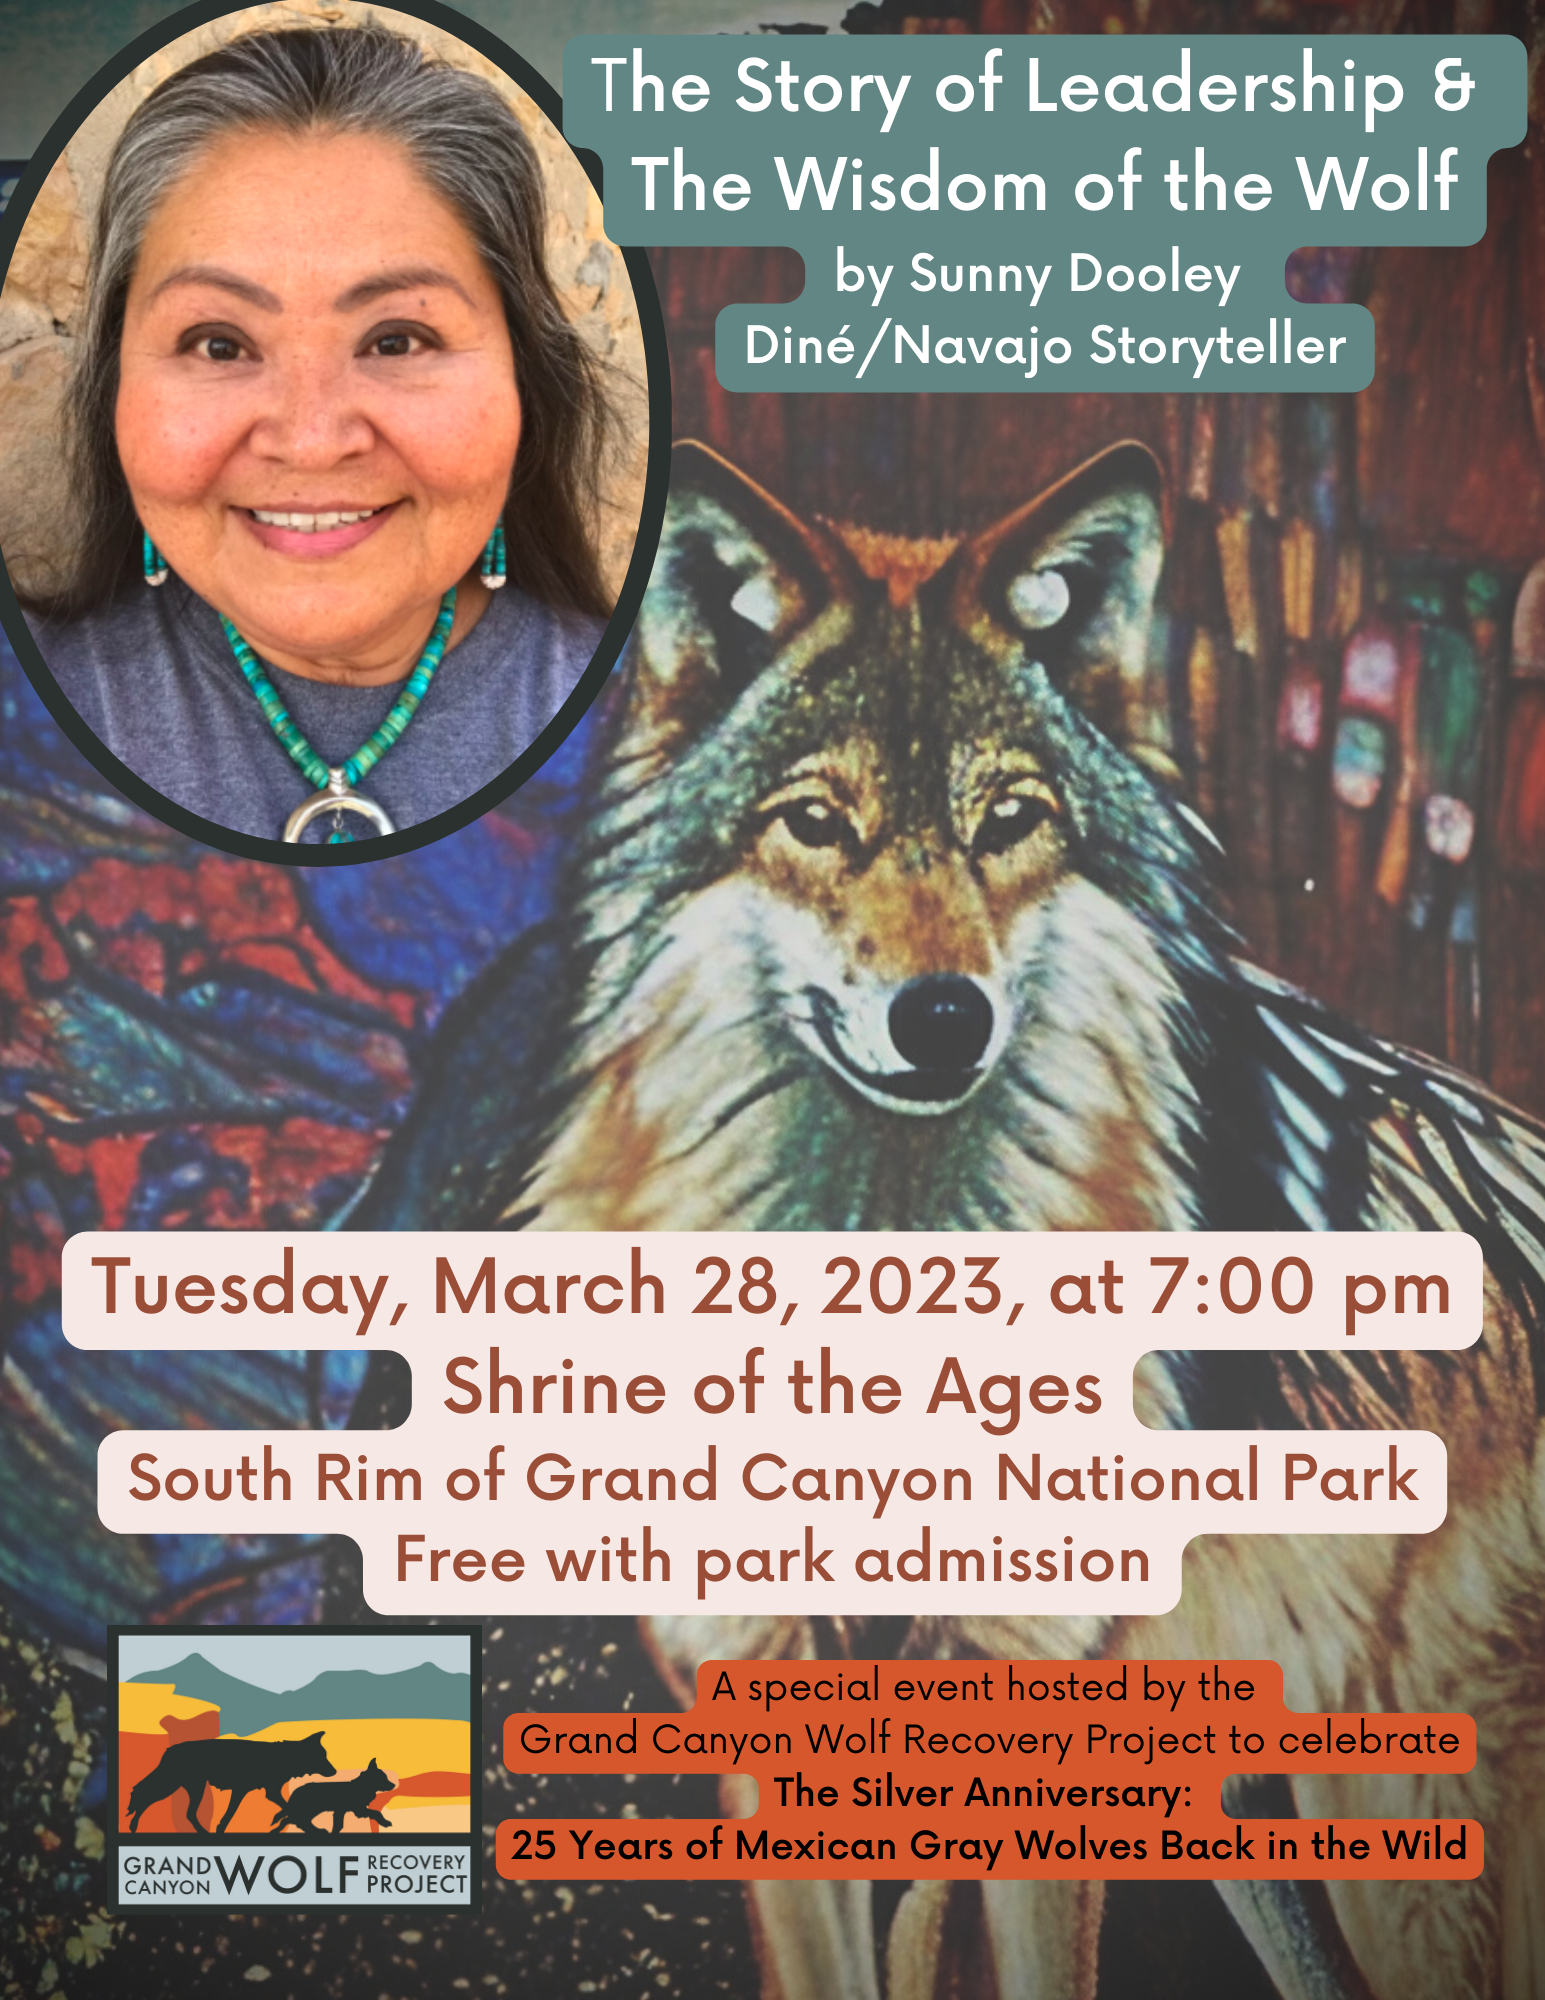 GC Shrine Sunny Dooley event poster 28 March 2023